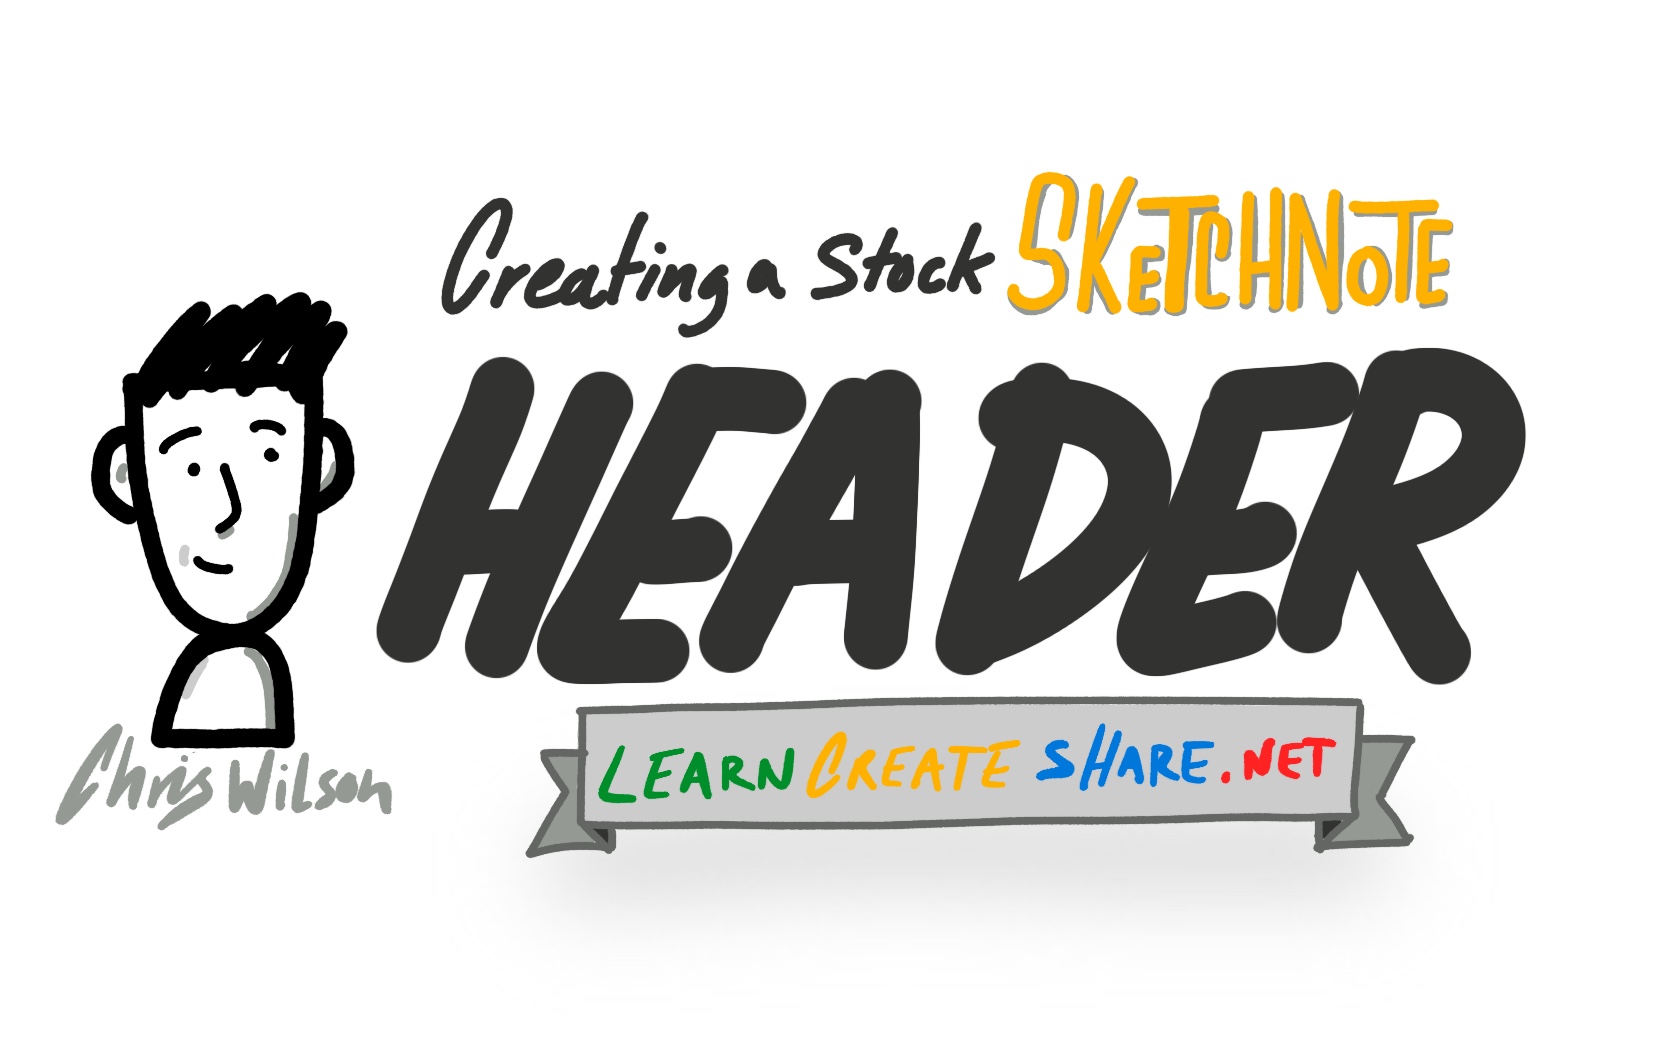 Creating a stock sketchnote header template.